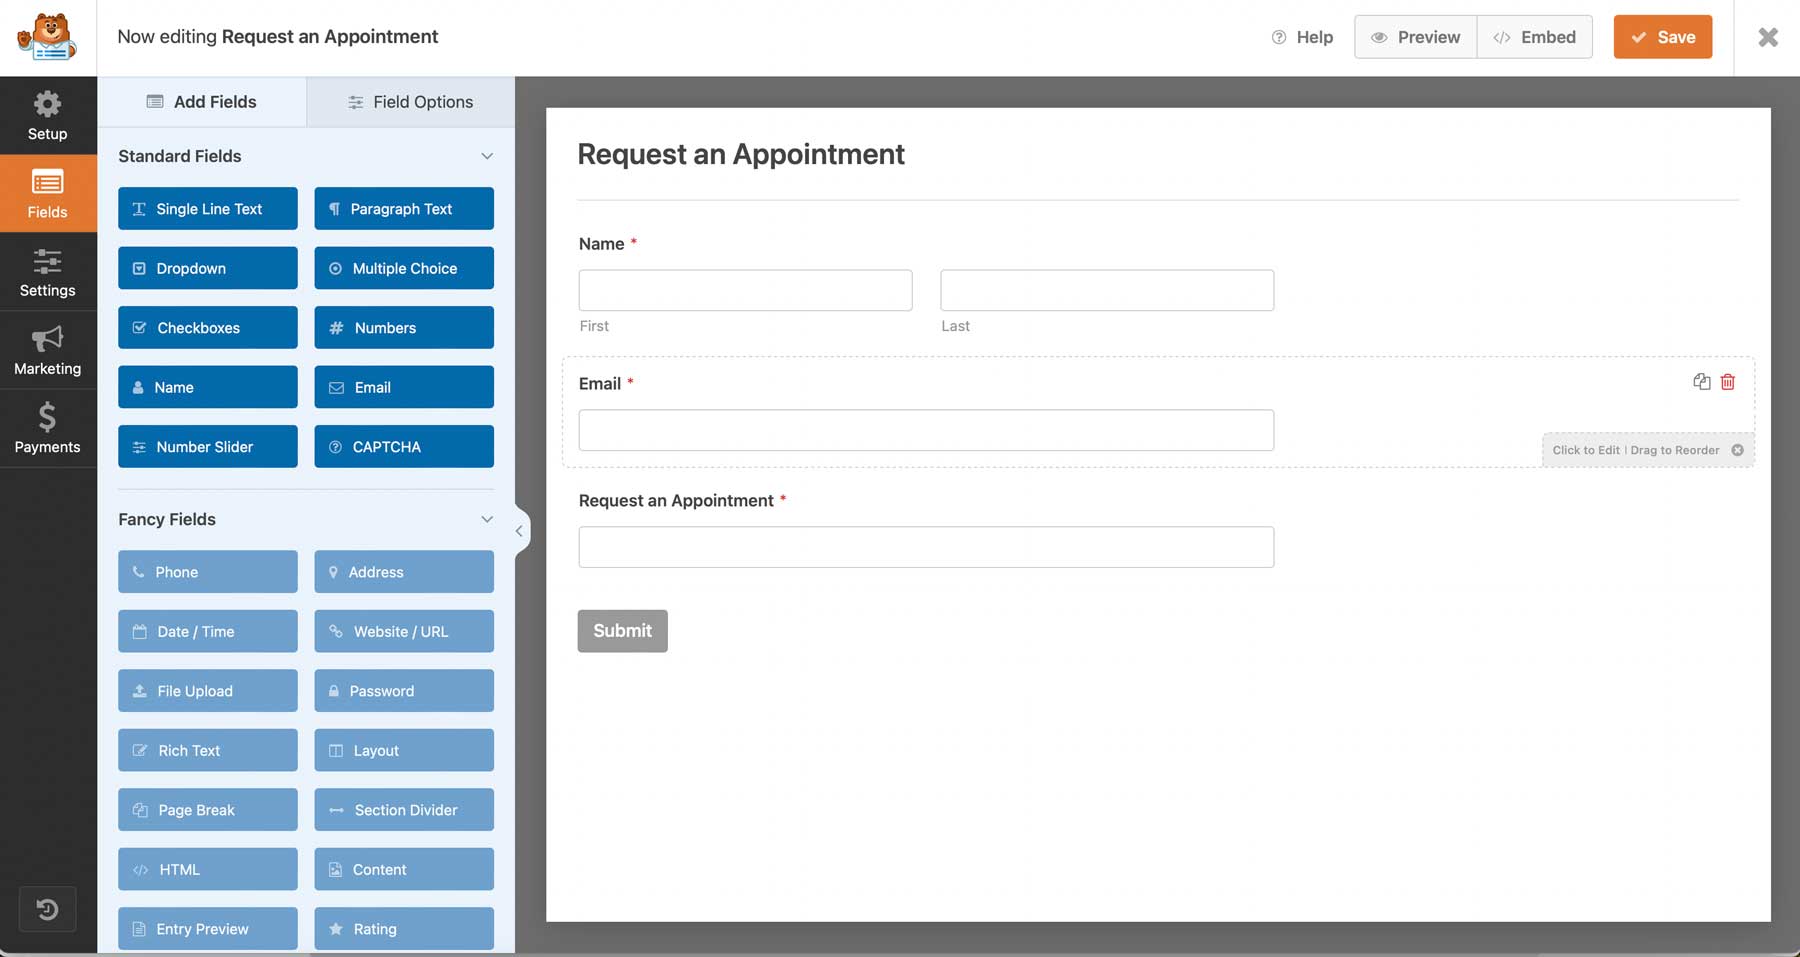 The WPForms form builder interface